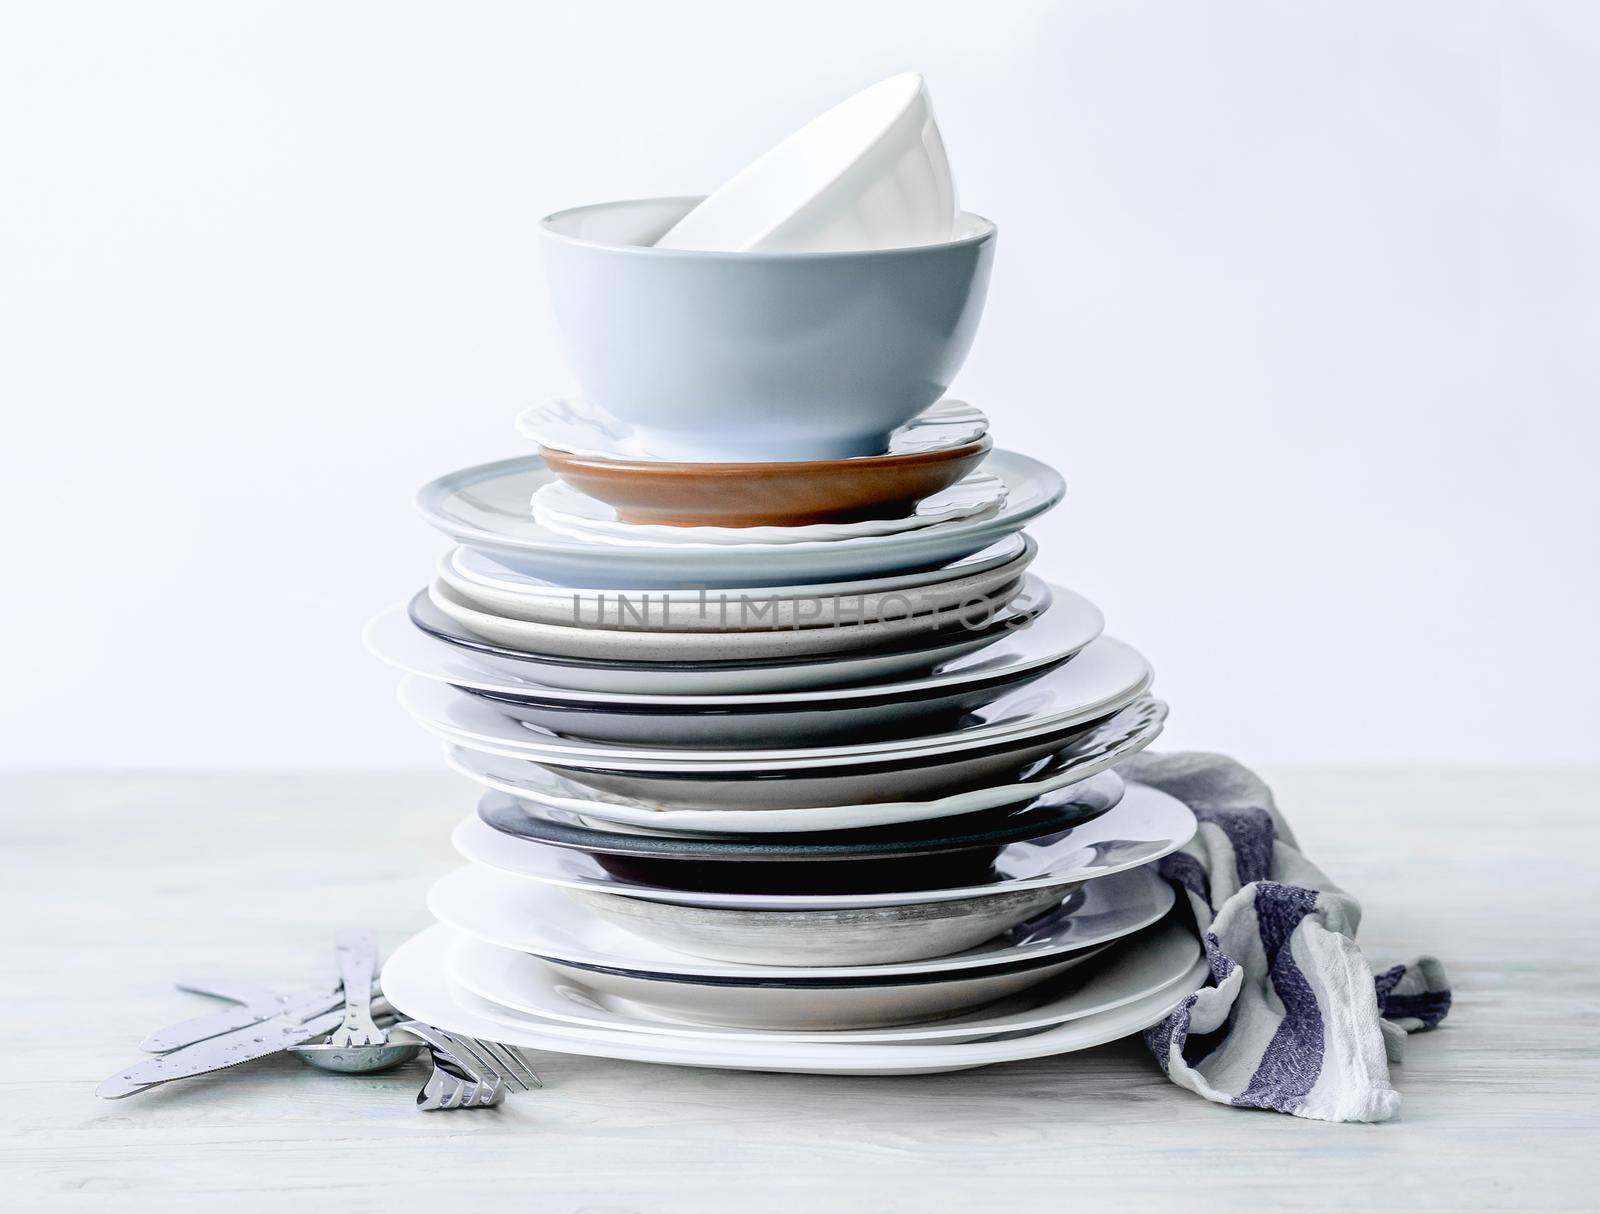 Stack of different plates by tan4ikk1